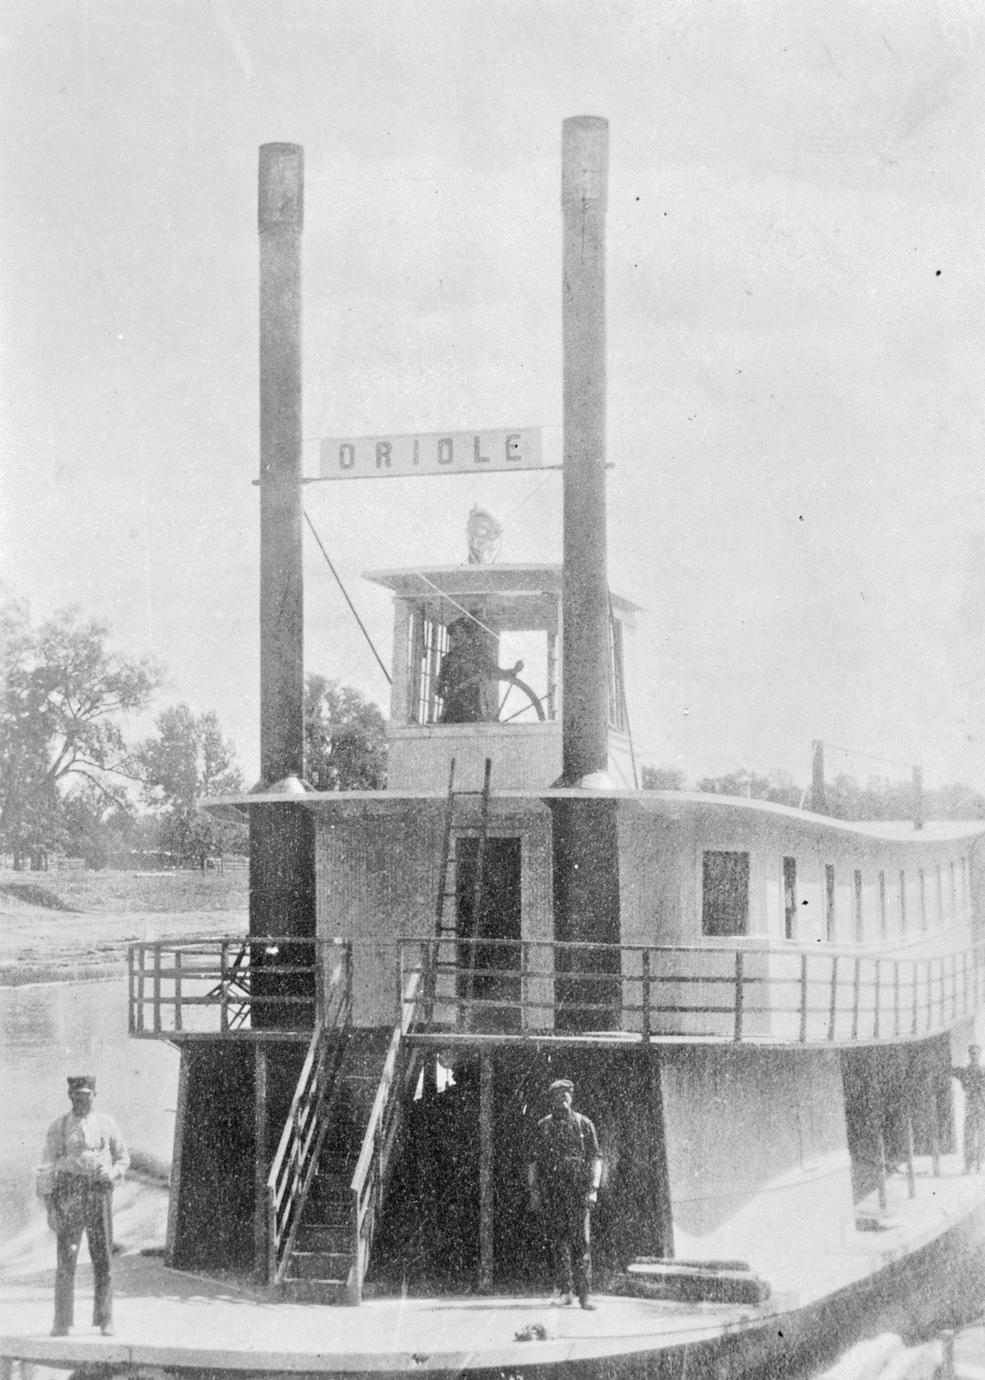 Oriole (Towboat/Snagboat/Dredge, 1908-1941)